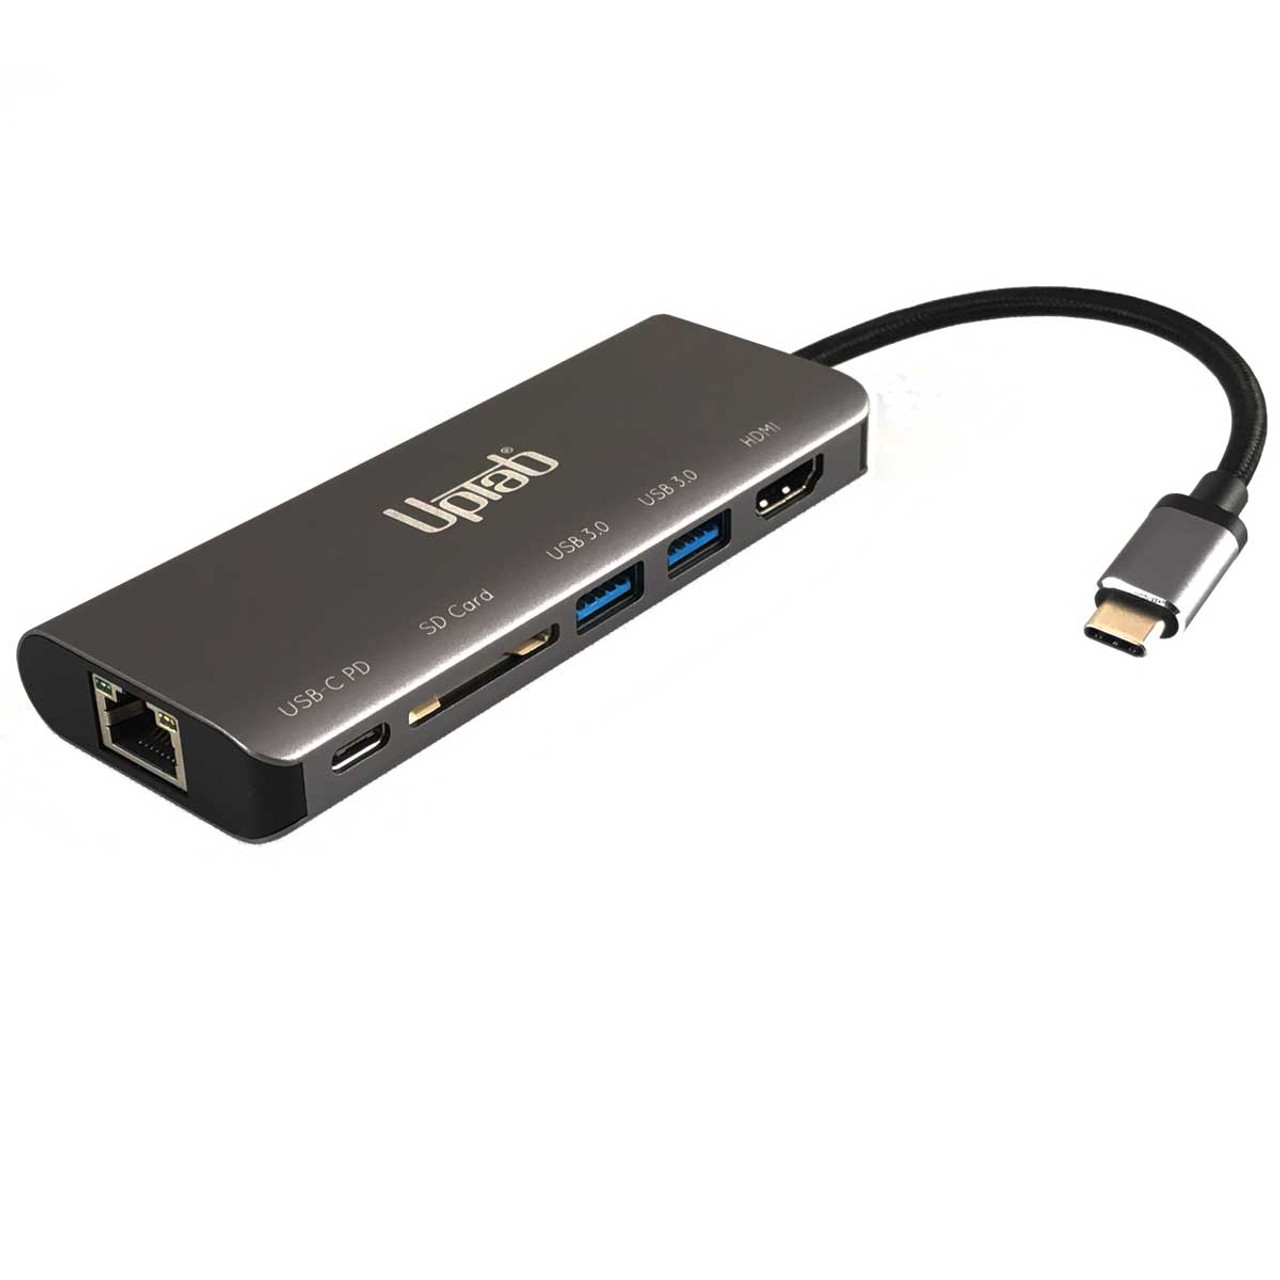 USB-C to HDMI with Power Delivery and USB 3.0 Port (Certified Refurbished)  - TRENDnet RB-TUC-HDMI3